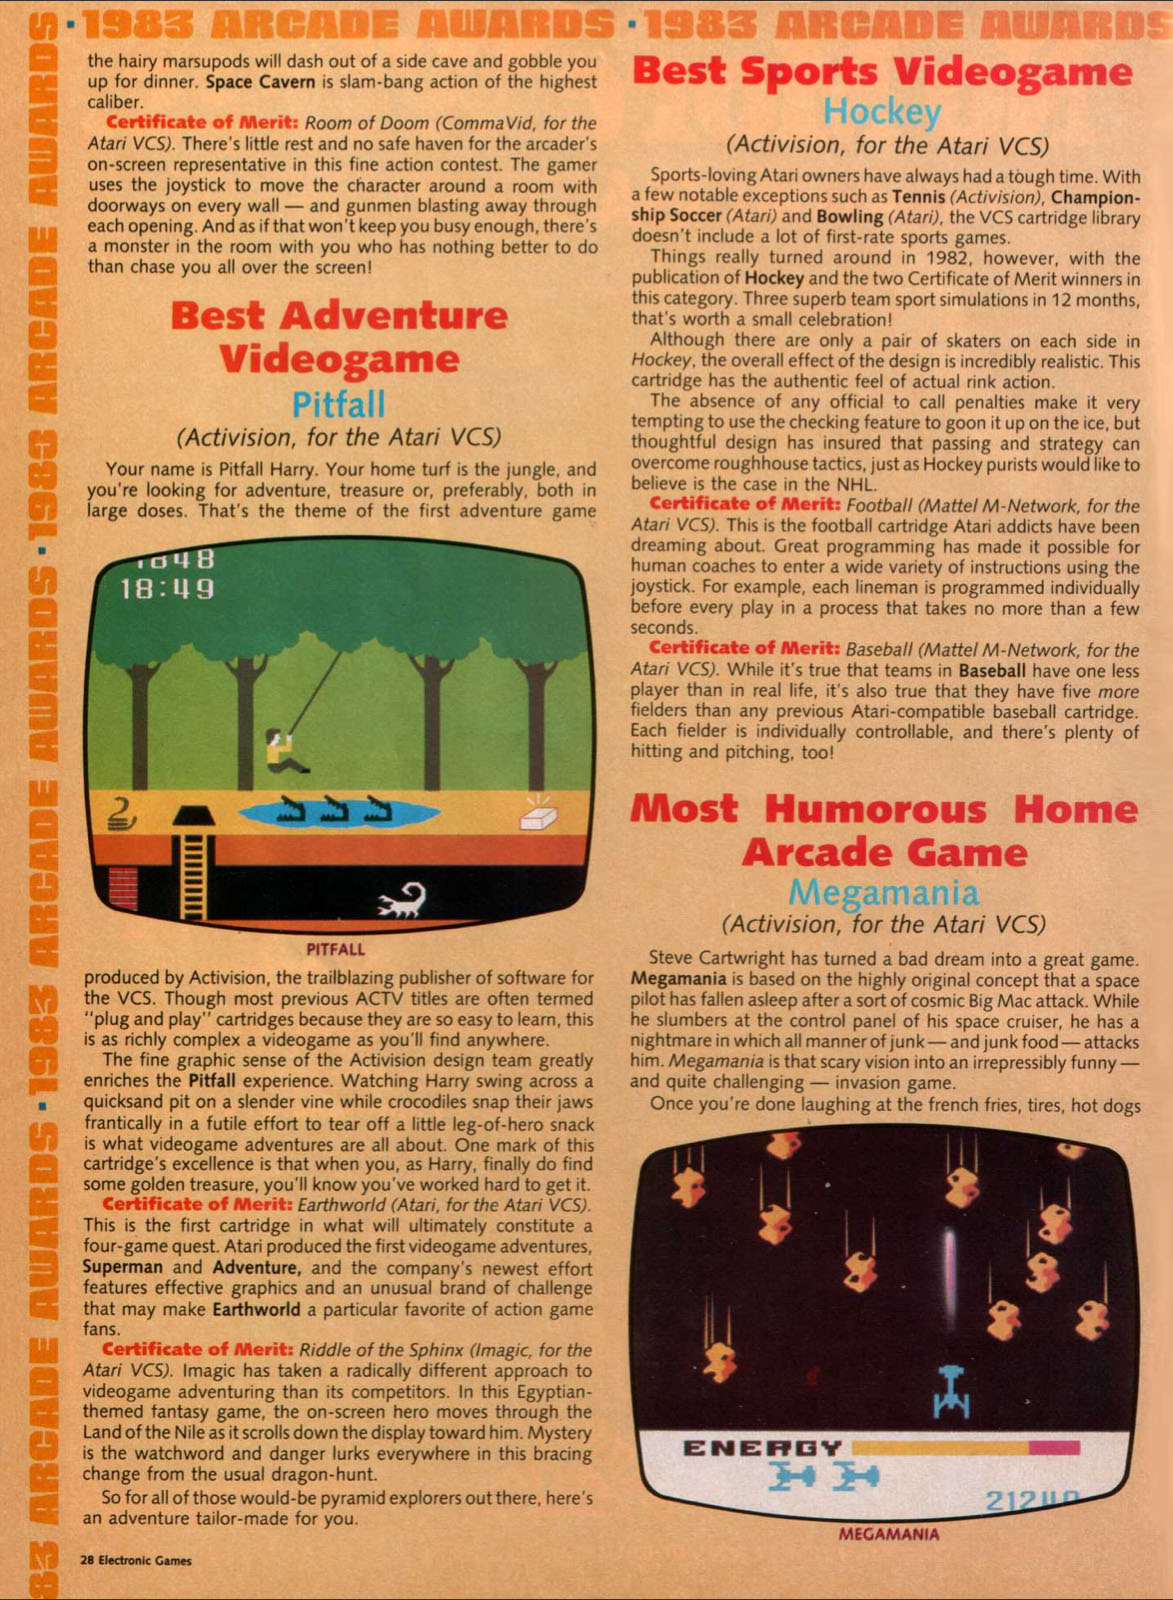 1983 Arcade Awards, Electronic Games January 1983 page 28